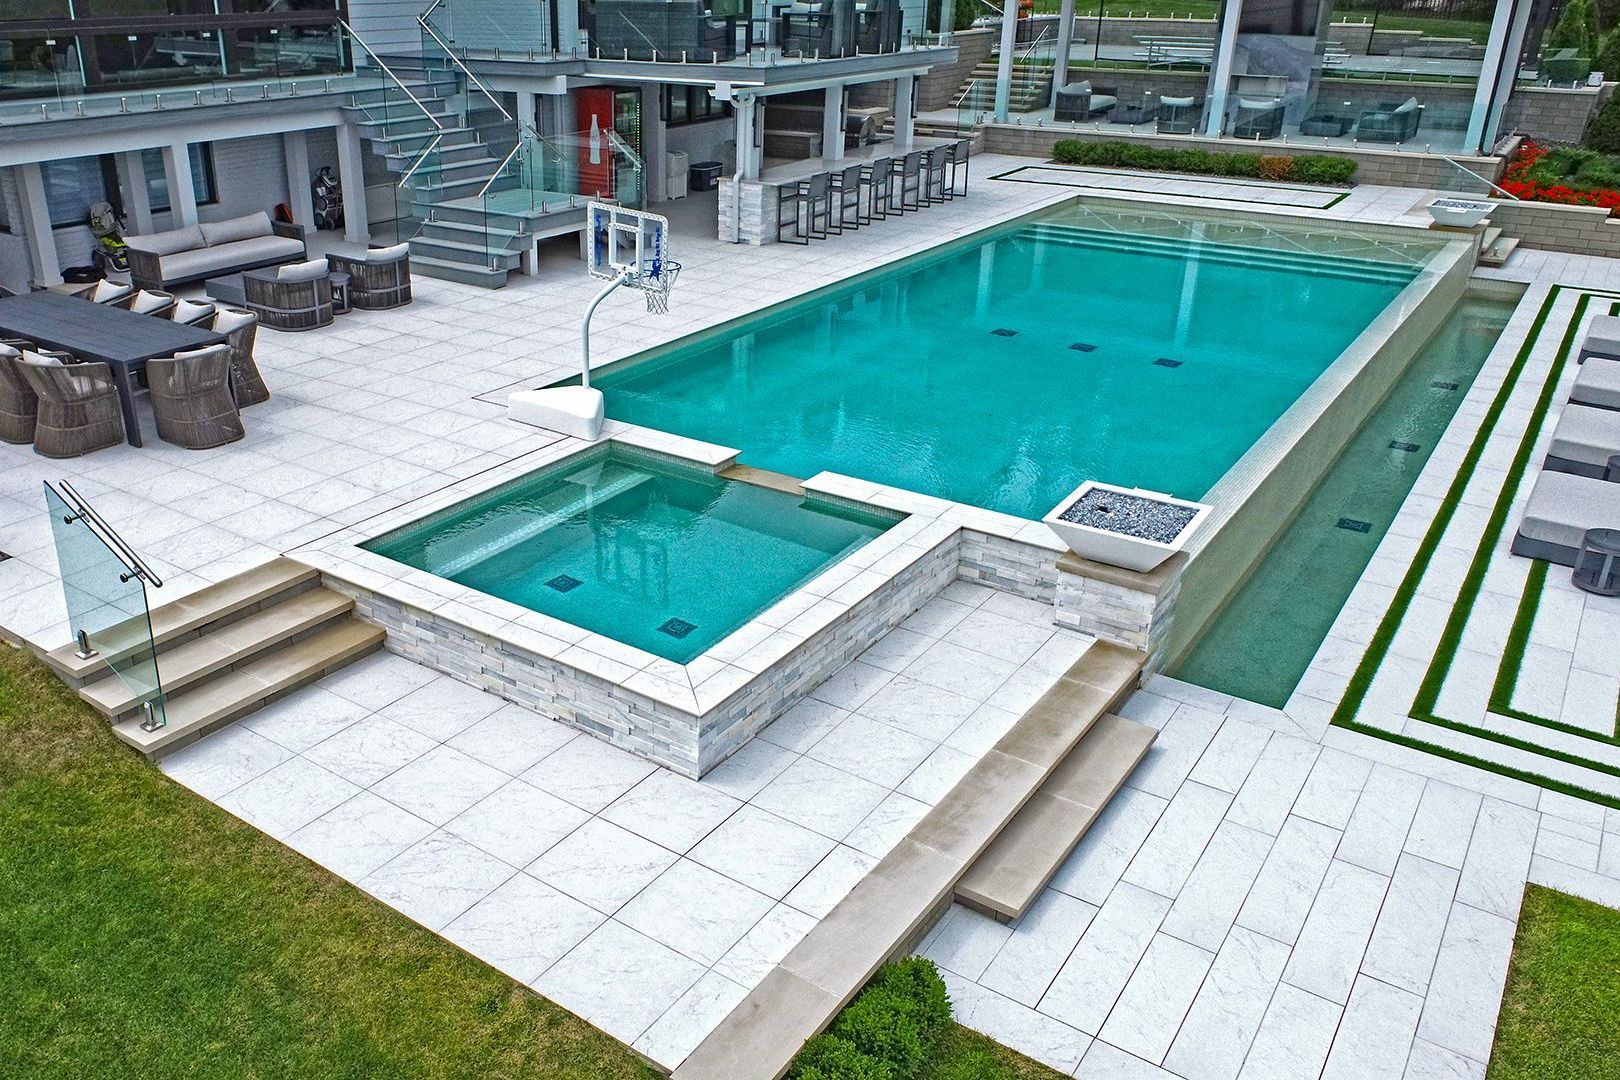 a large swimming pool with a hot tub in the backyard of a house .